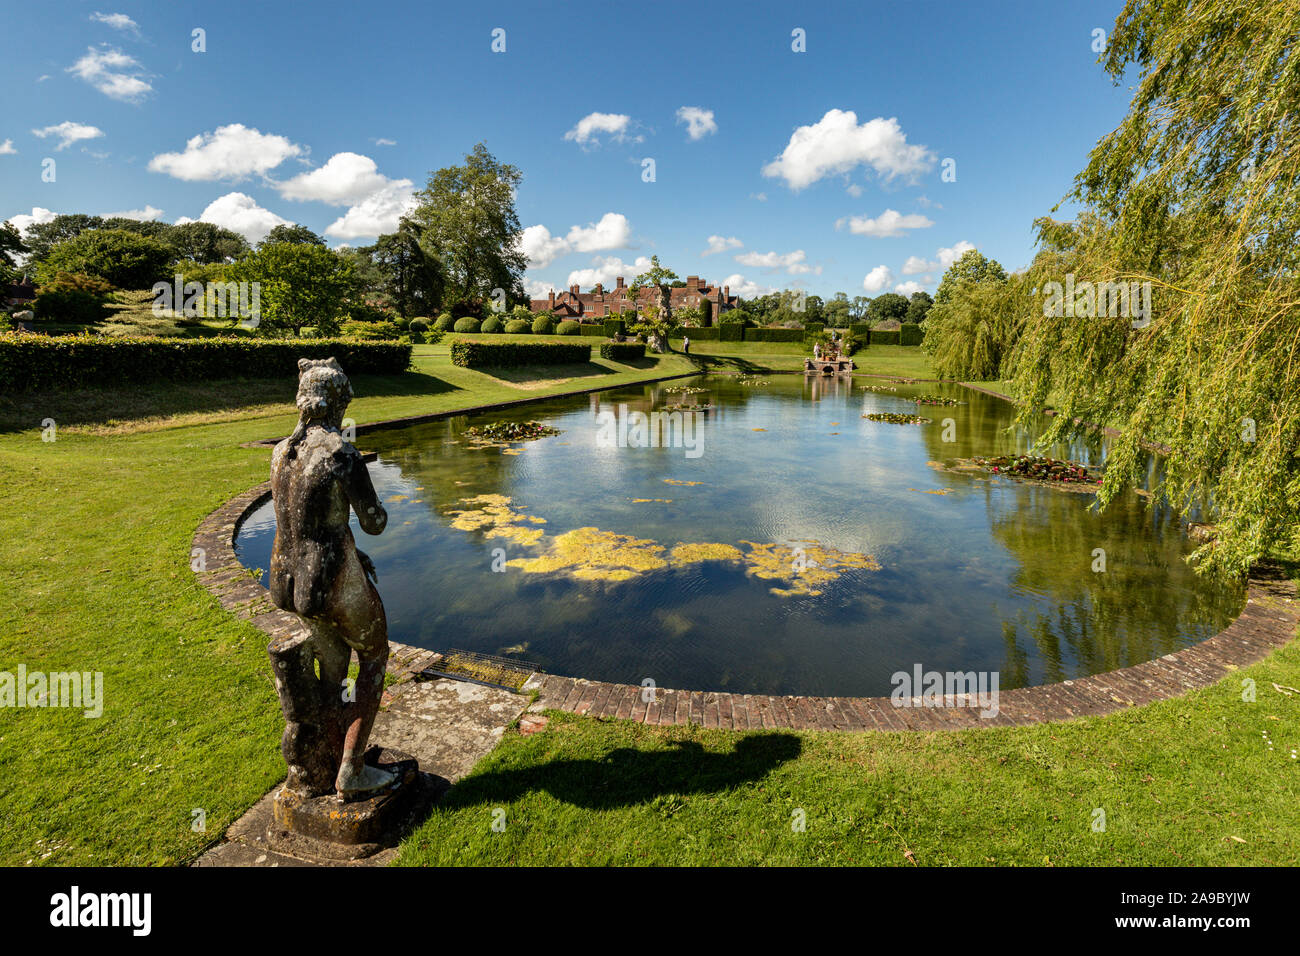 Ornamental statue and pond in the gardens of Godinton House & Gardens, Ashford, Kent Stock Photo